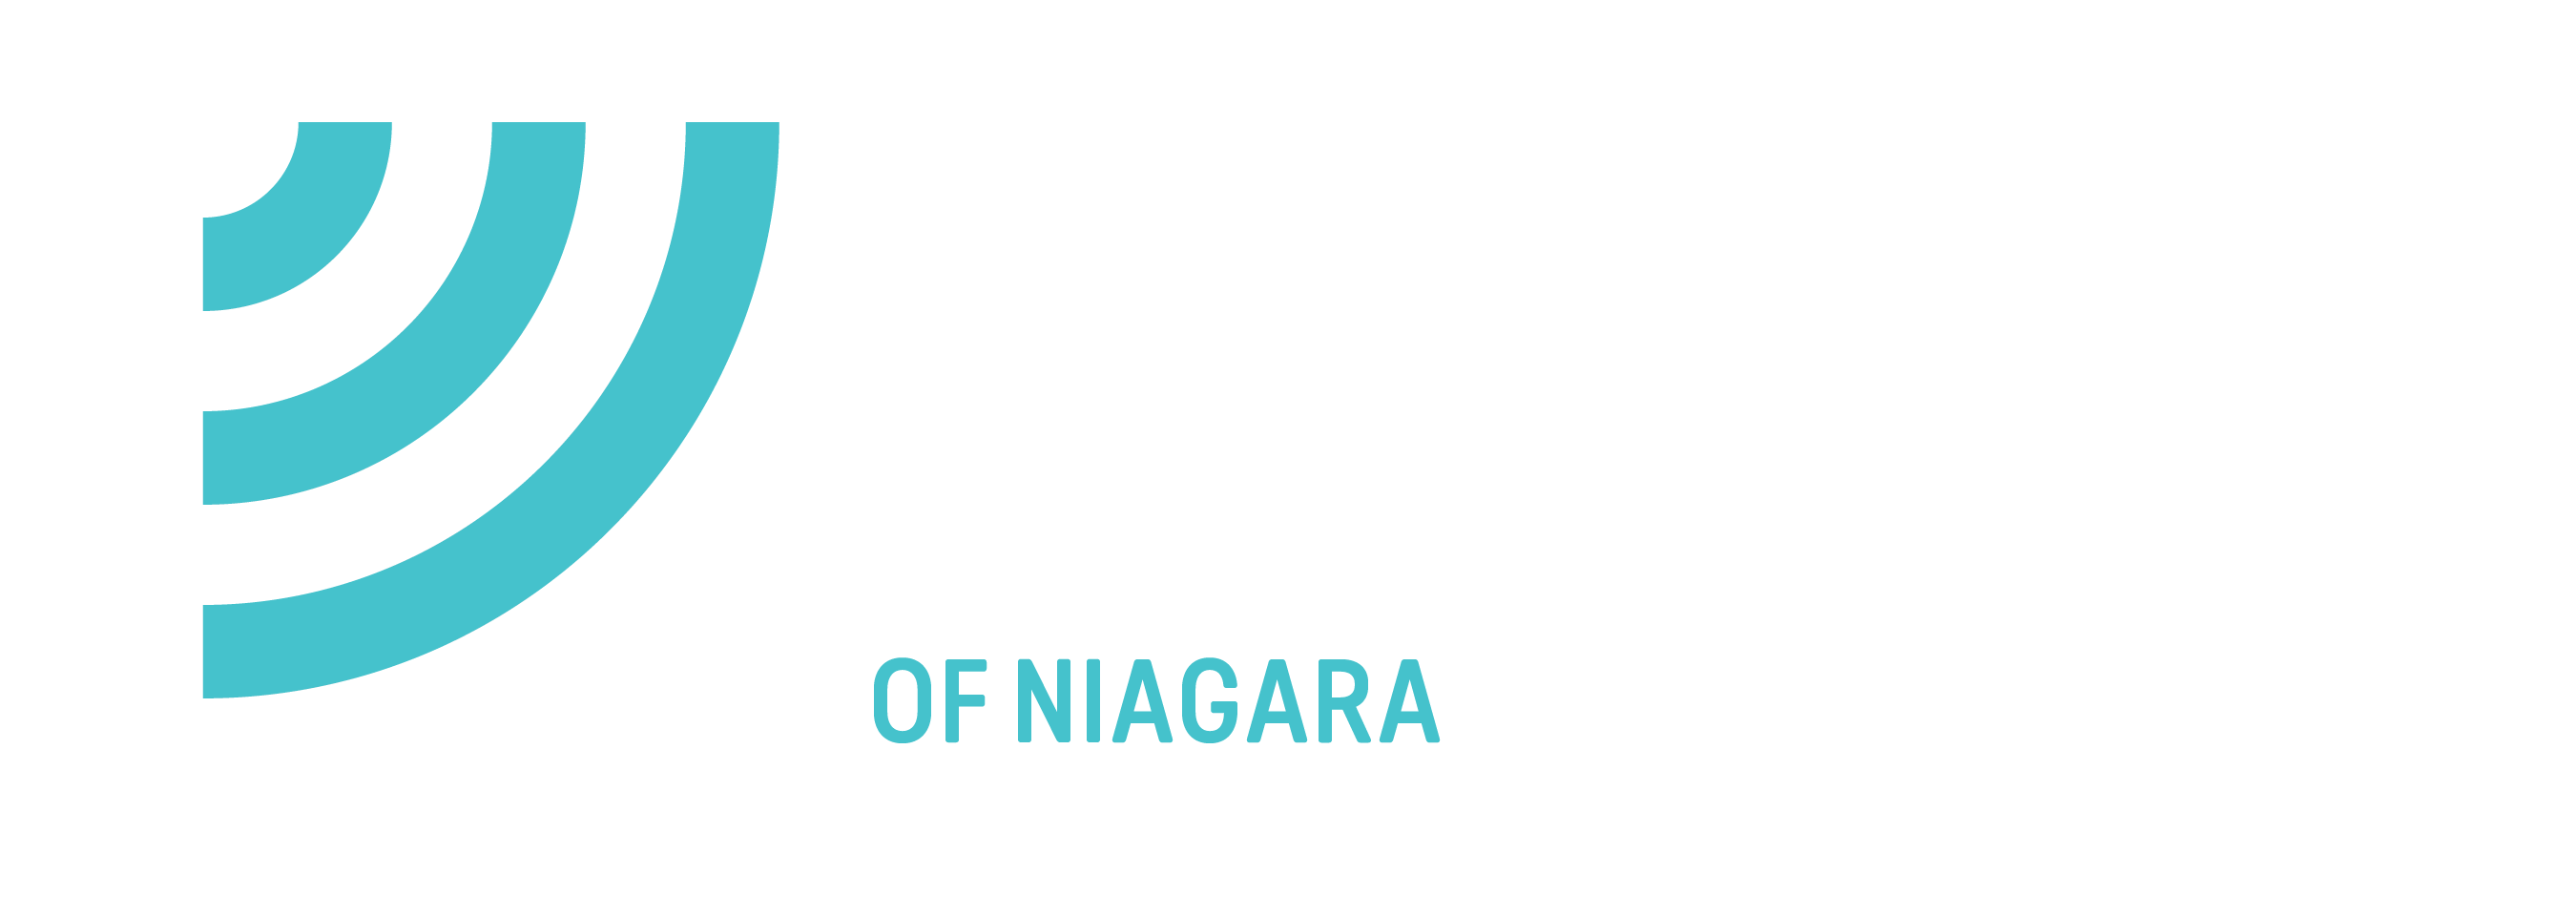 A REMINDER FROM ONE OF OUR STAFF - Big Brothers Big Sisters of Niagara